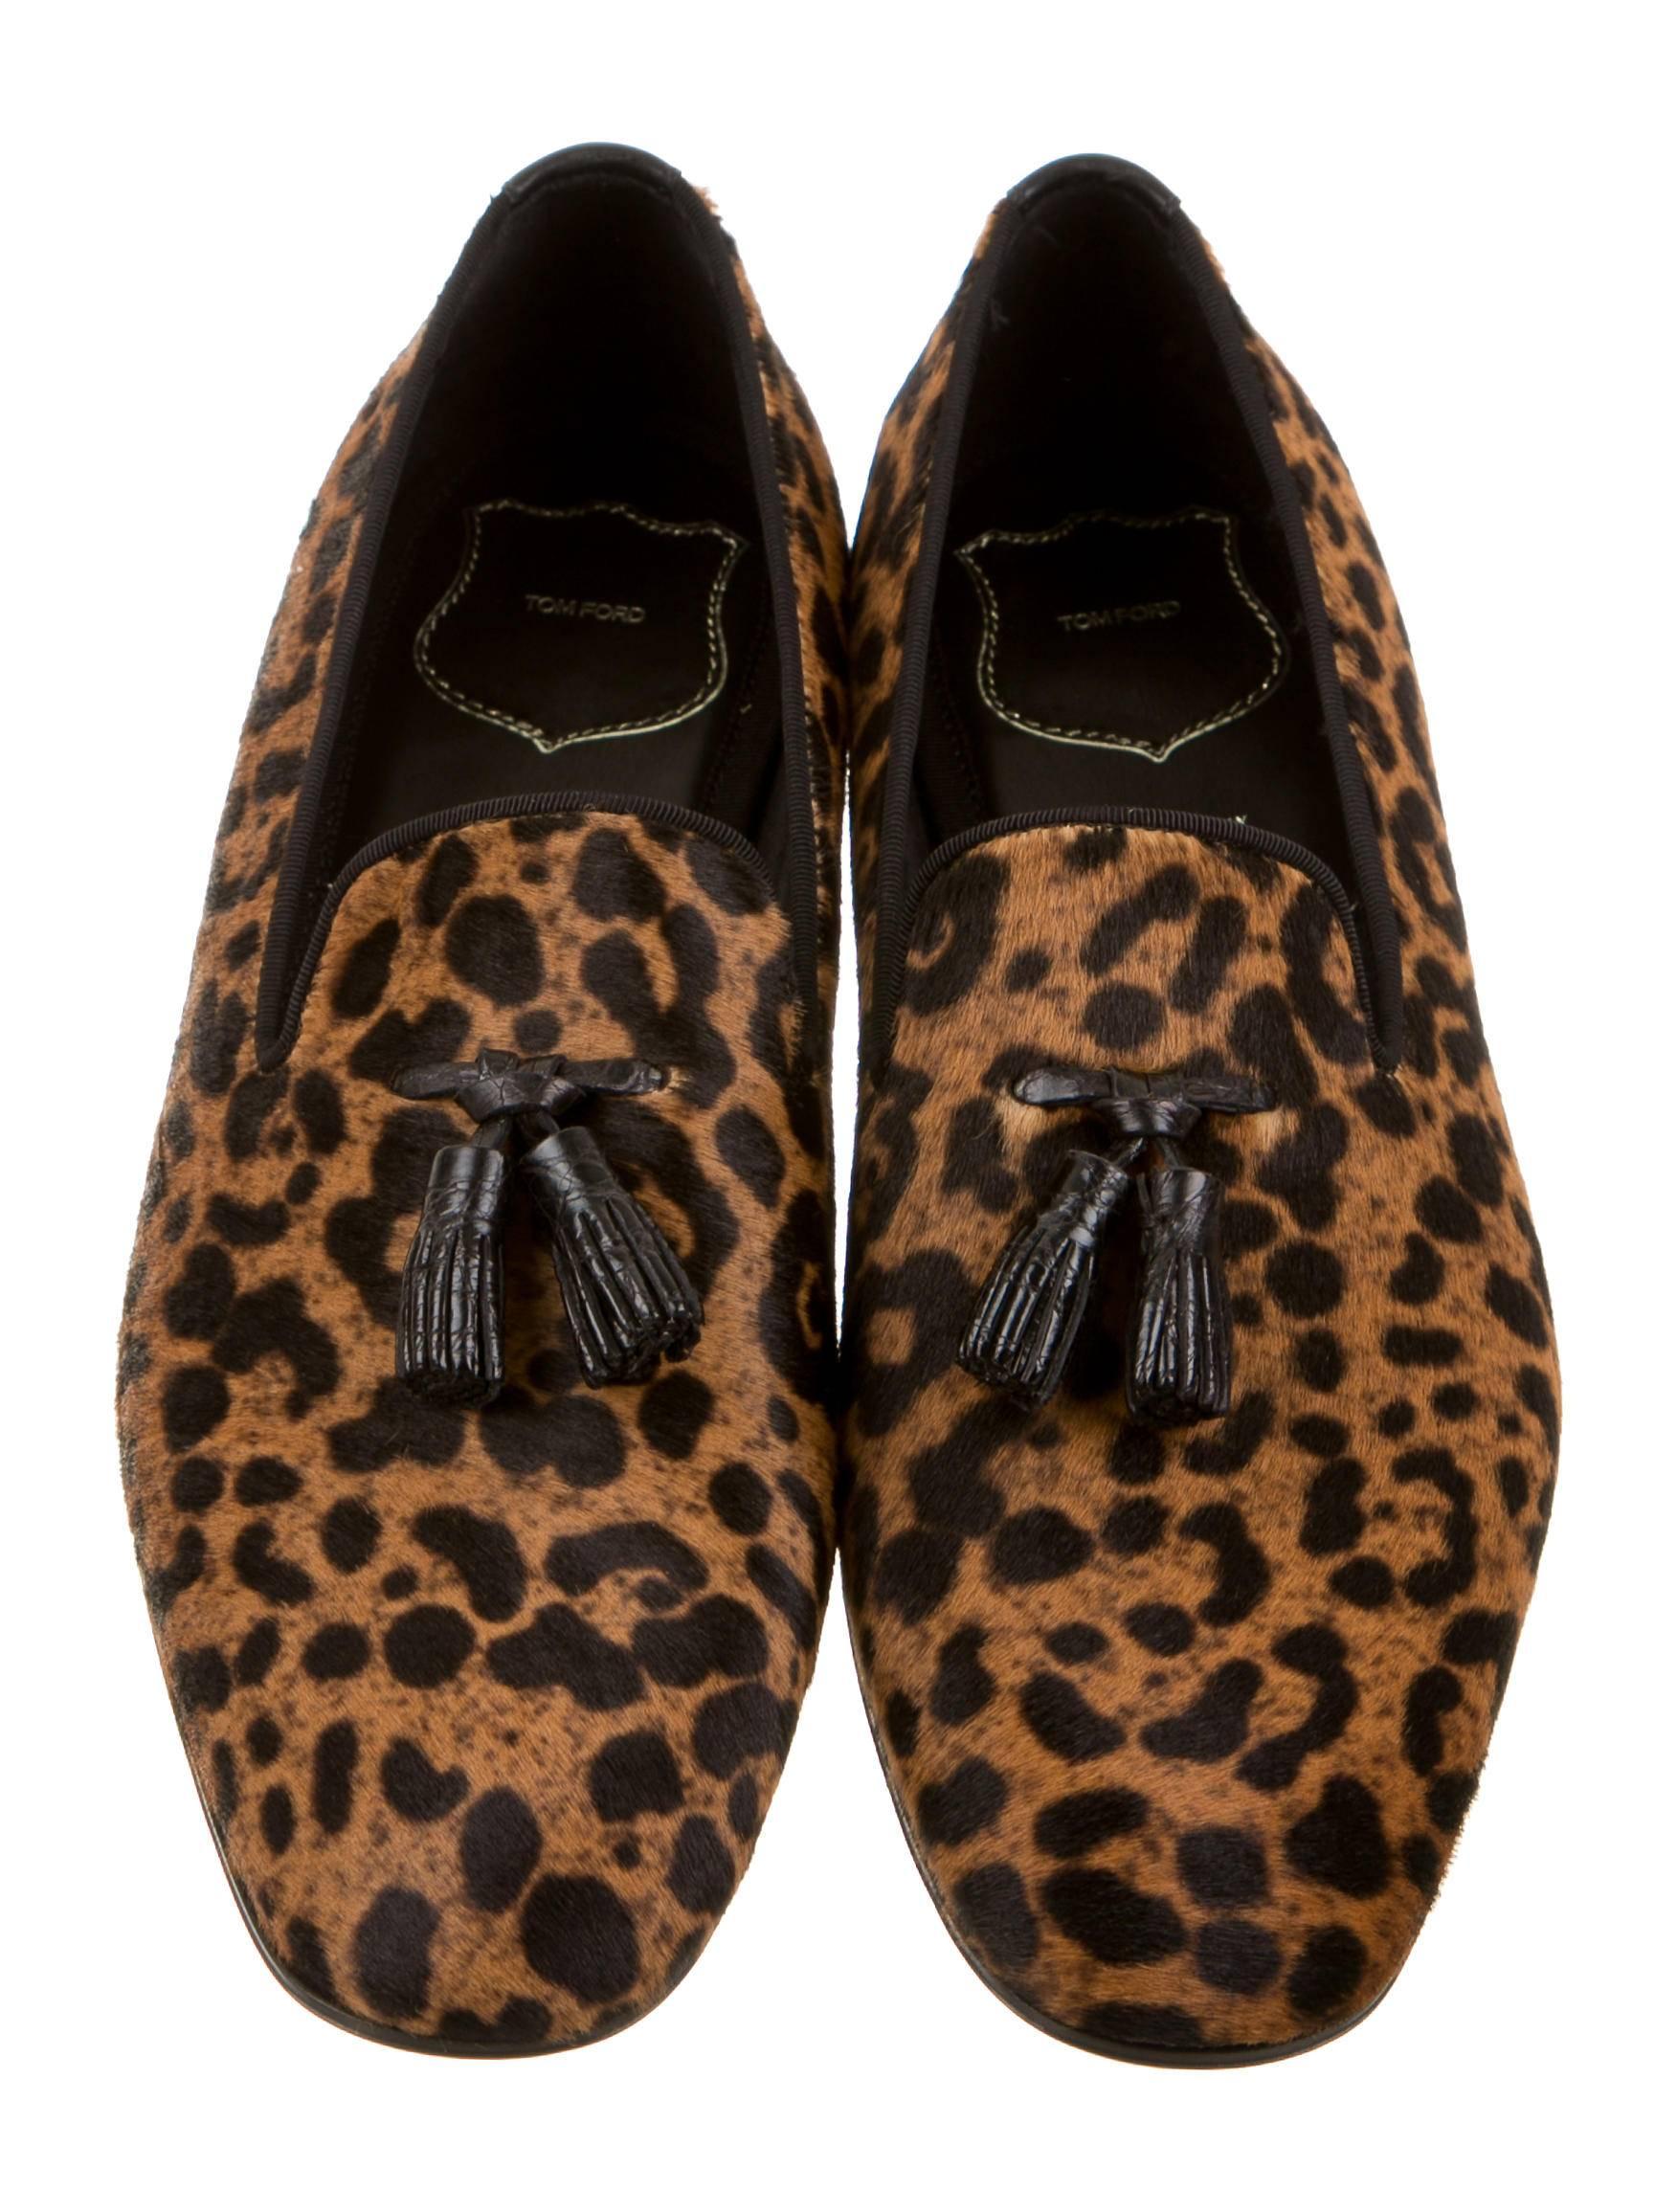 CURATOR'S NOTES 

Tom Ford New Men's Leopard Print Loafers Flats Slippers Shoes in Box  

Original retail price $2,495 
Size IT 42 (US 10)
Ponyhair fur 
Grosgrain trim 
Leather sole
Leather tassel 
Made in Italy 
Heel height 0.75" 
Includes